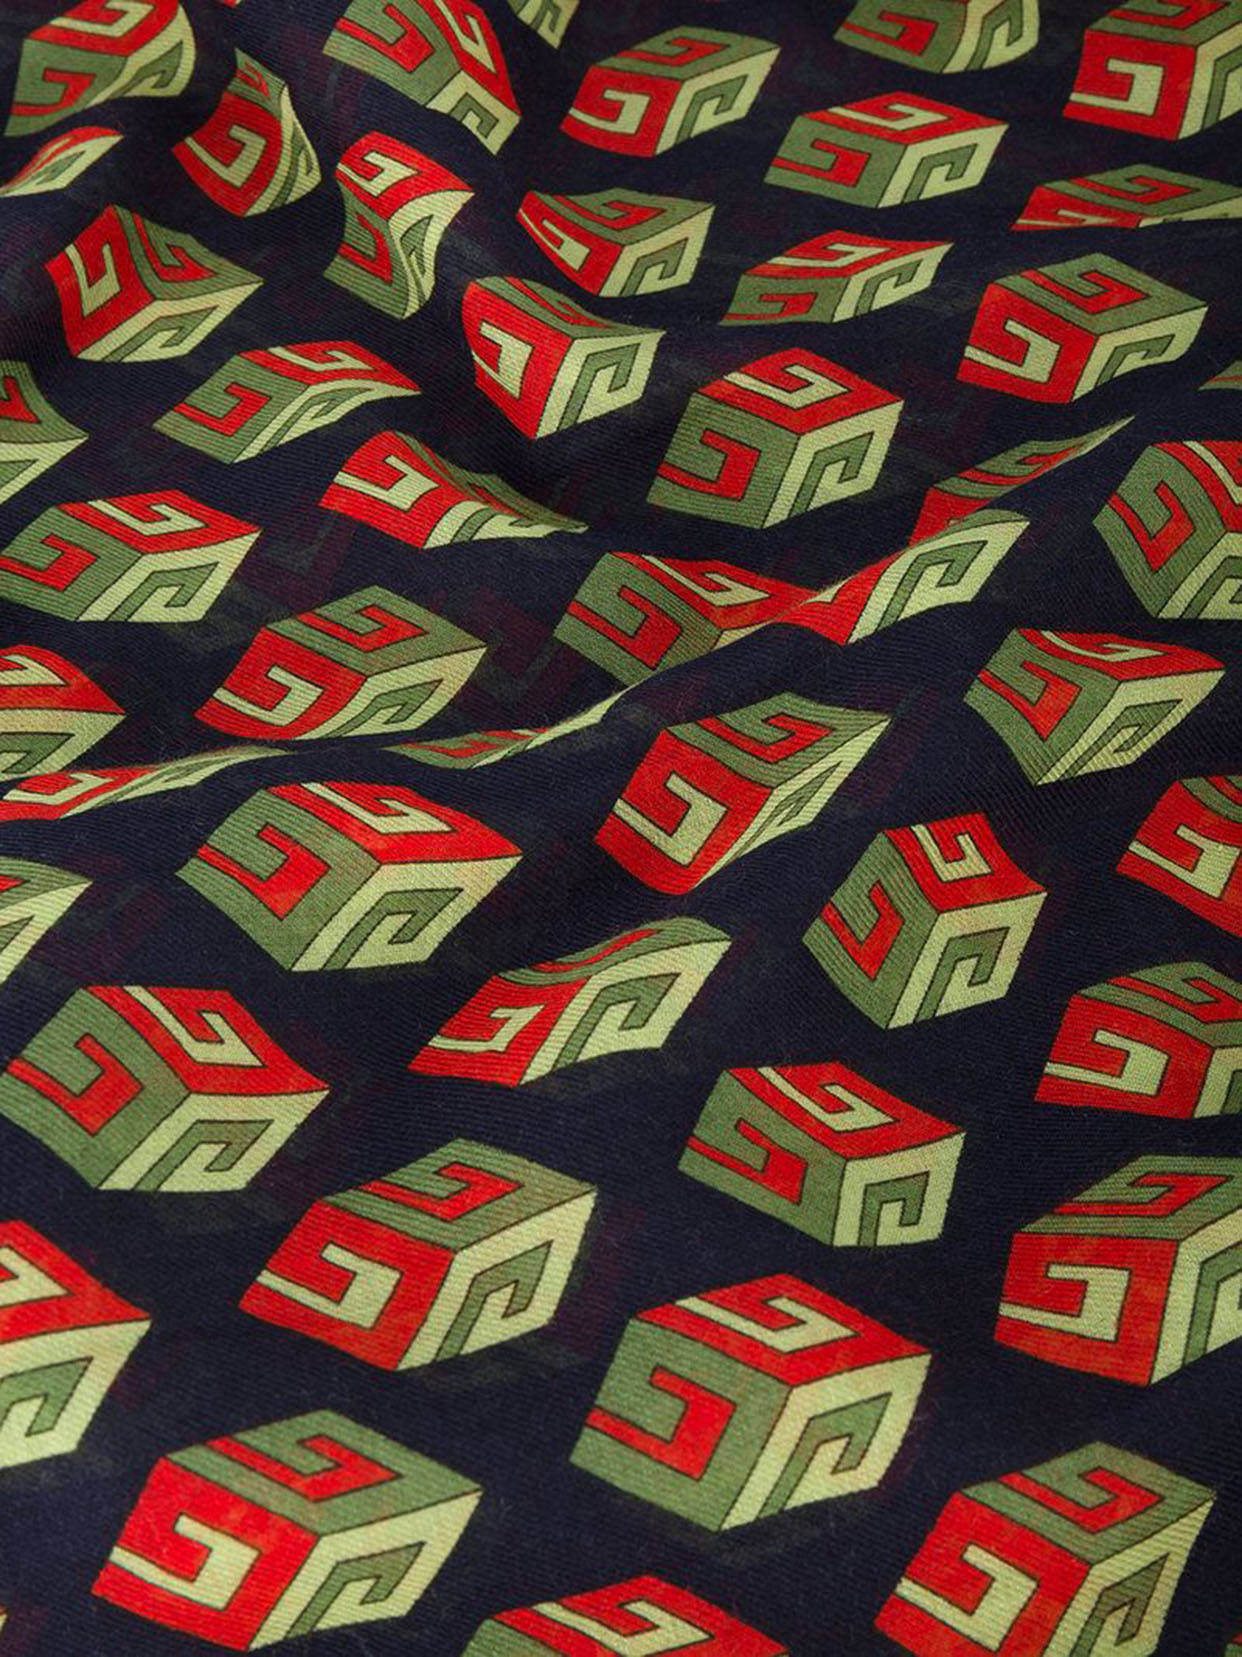 Gucci Pattern Cube Icons Background